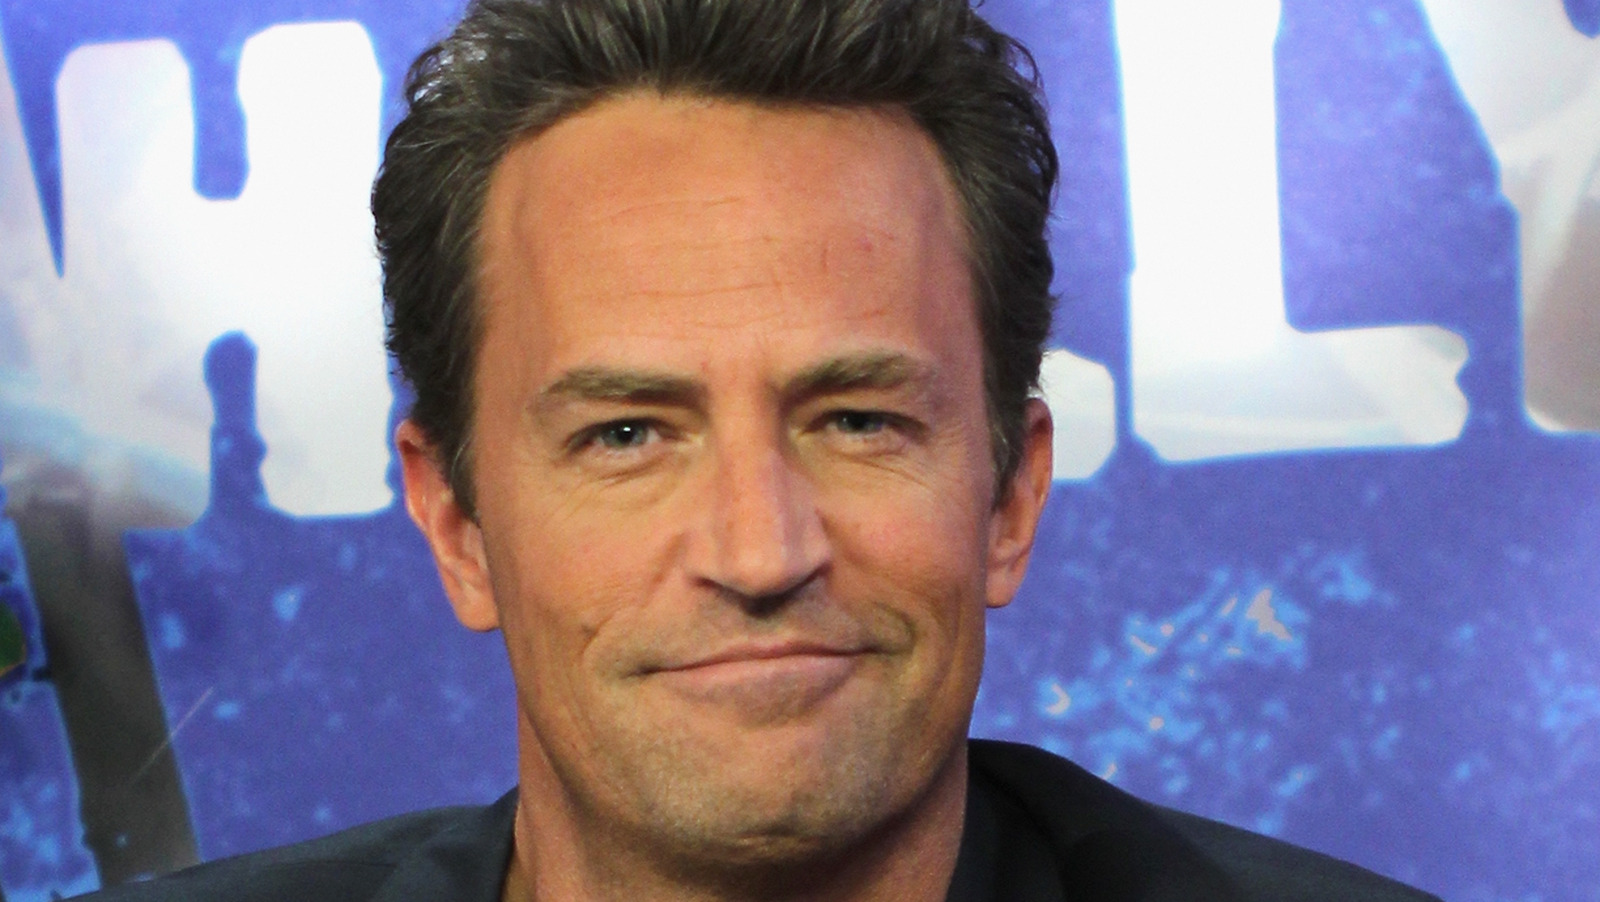 The Real Reason Matthew Perry Just Ended His Engagement.